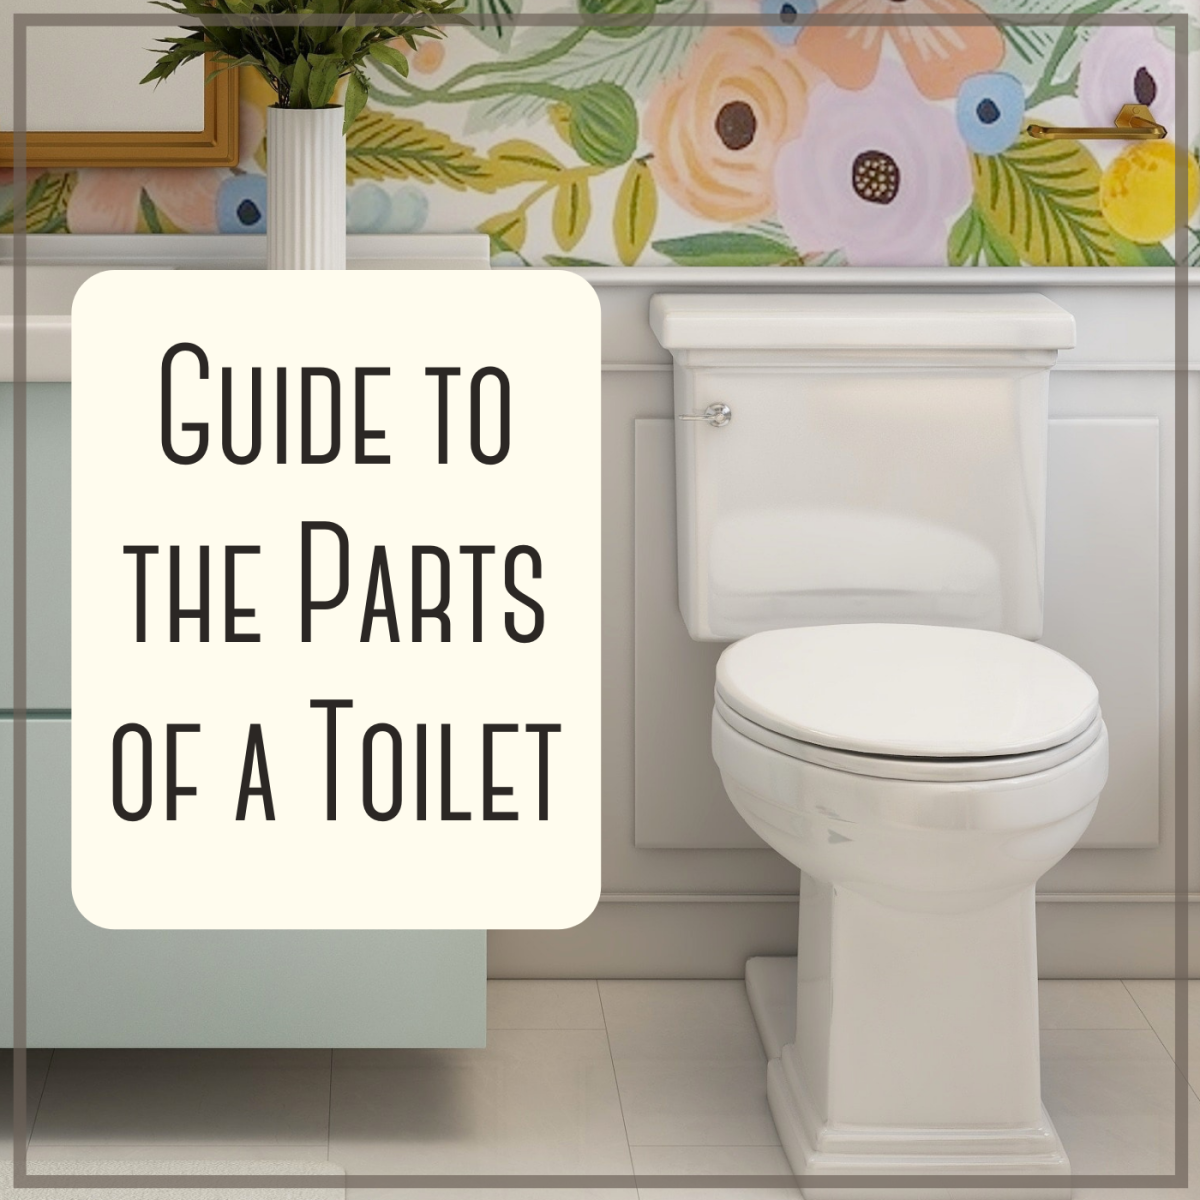 If you need to troubleshoot a toilet problem at home, it's best to start with an understanding of all the parts of your commode and what they do.